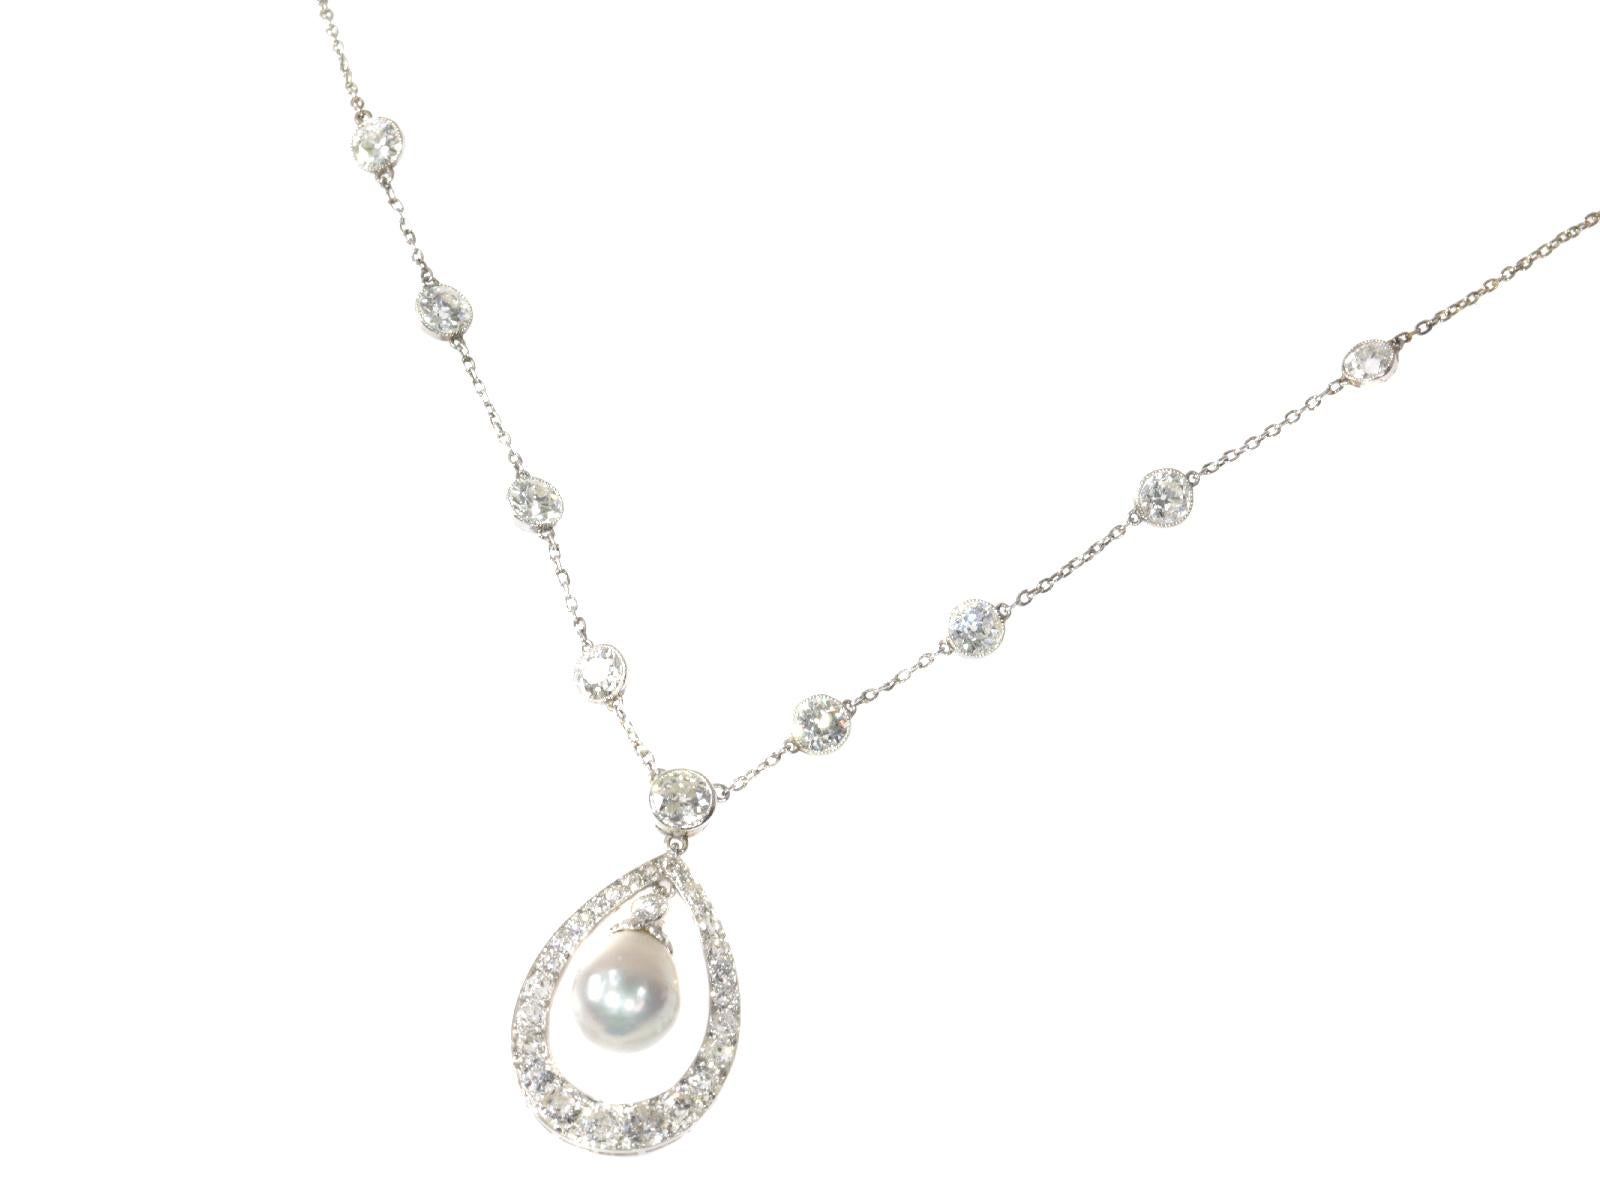 Women's Platinum Art Deco Diamond Necklace with Natural Drop Pearl of 7 Carat, 1930s For Sale